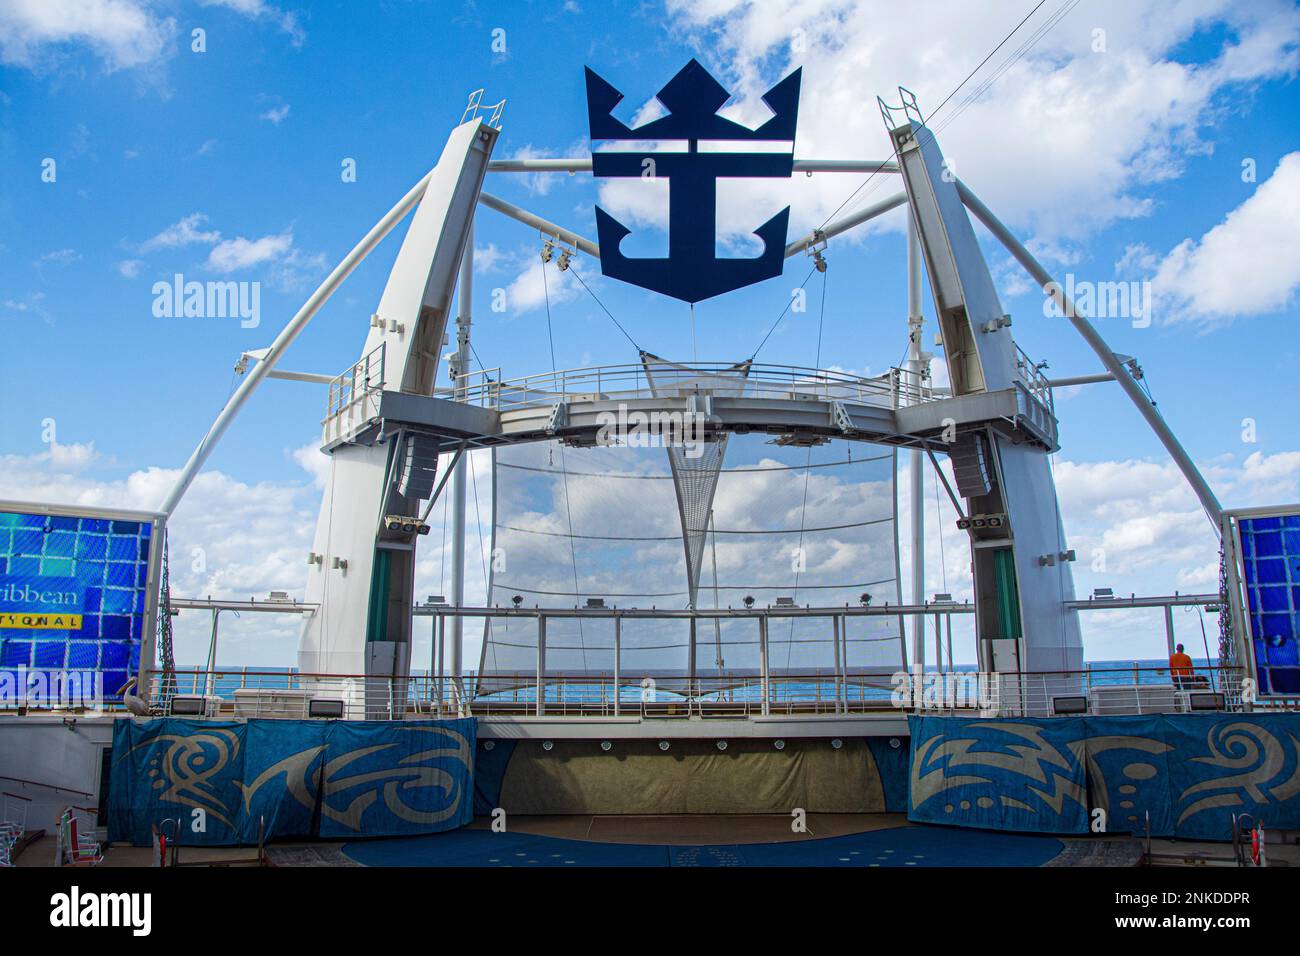 The stern of the Allure of the Seas, Royal Caribbean cruise lines. Stock Photo